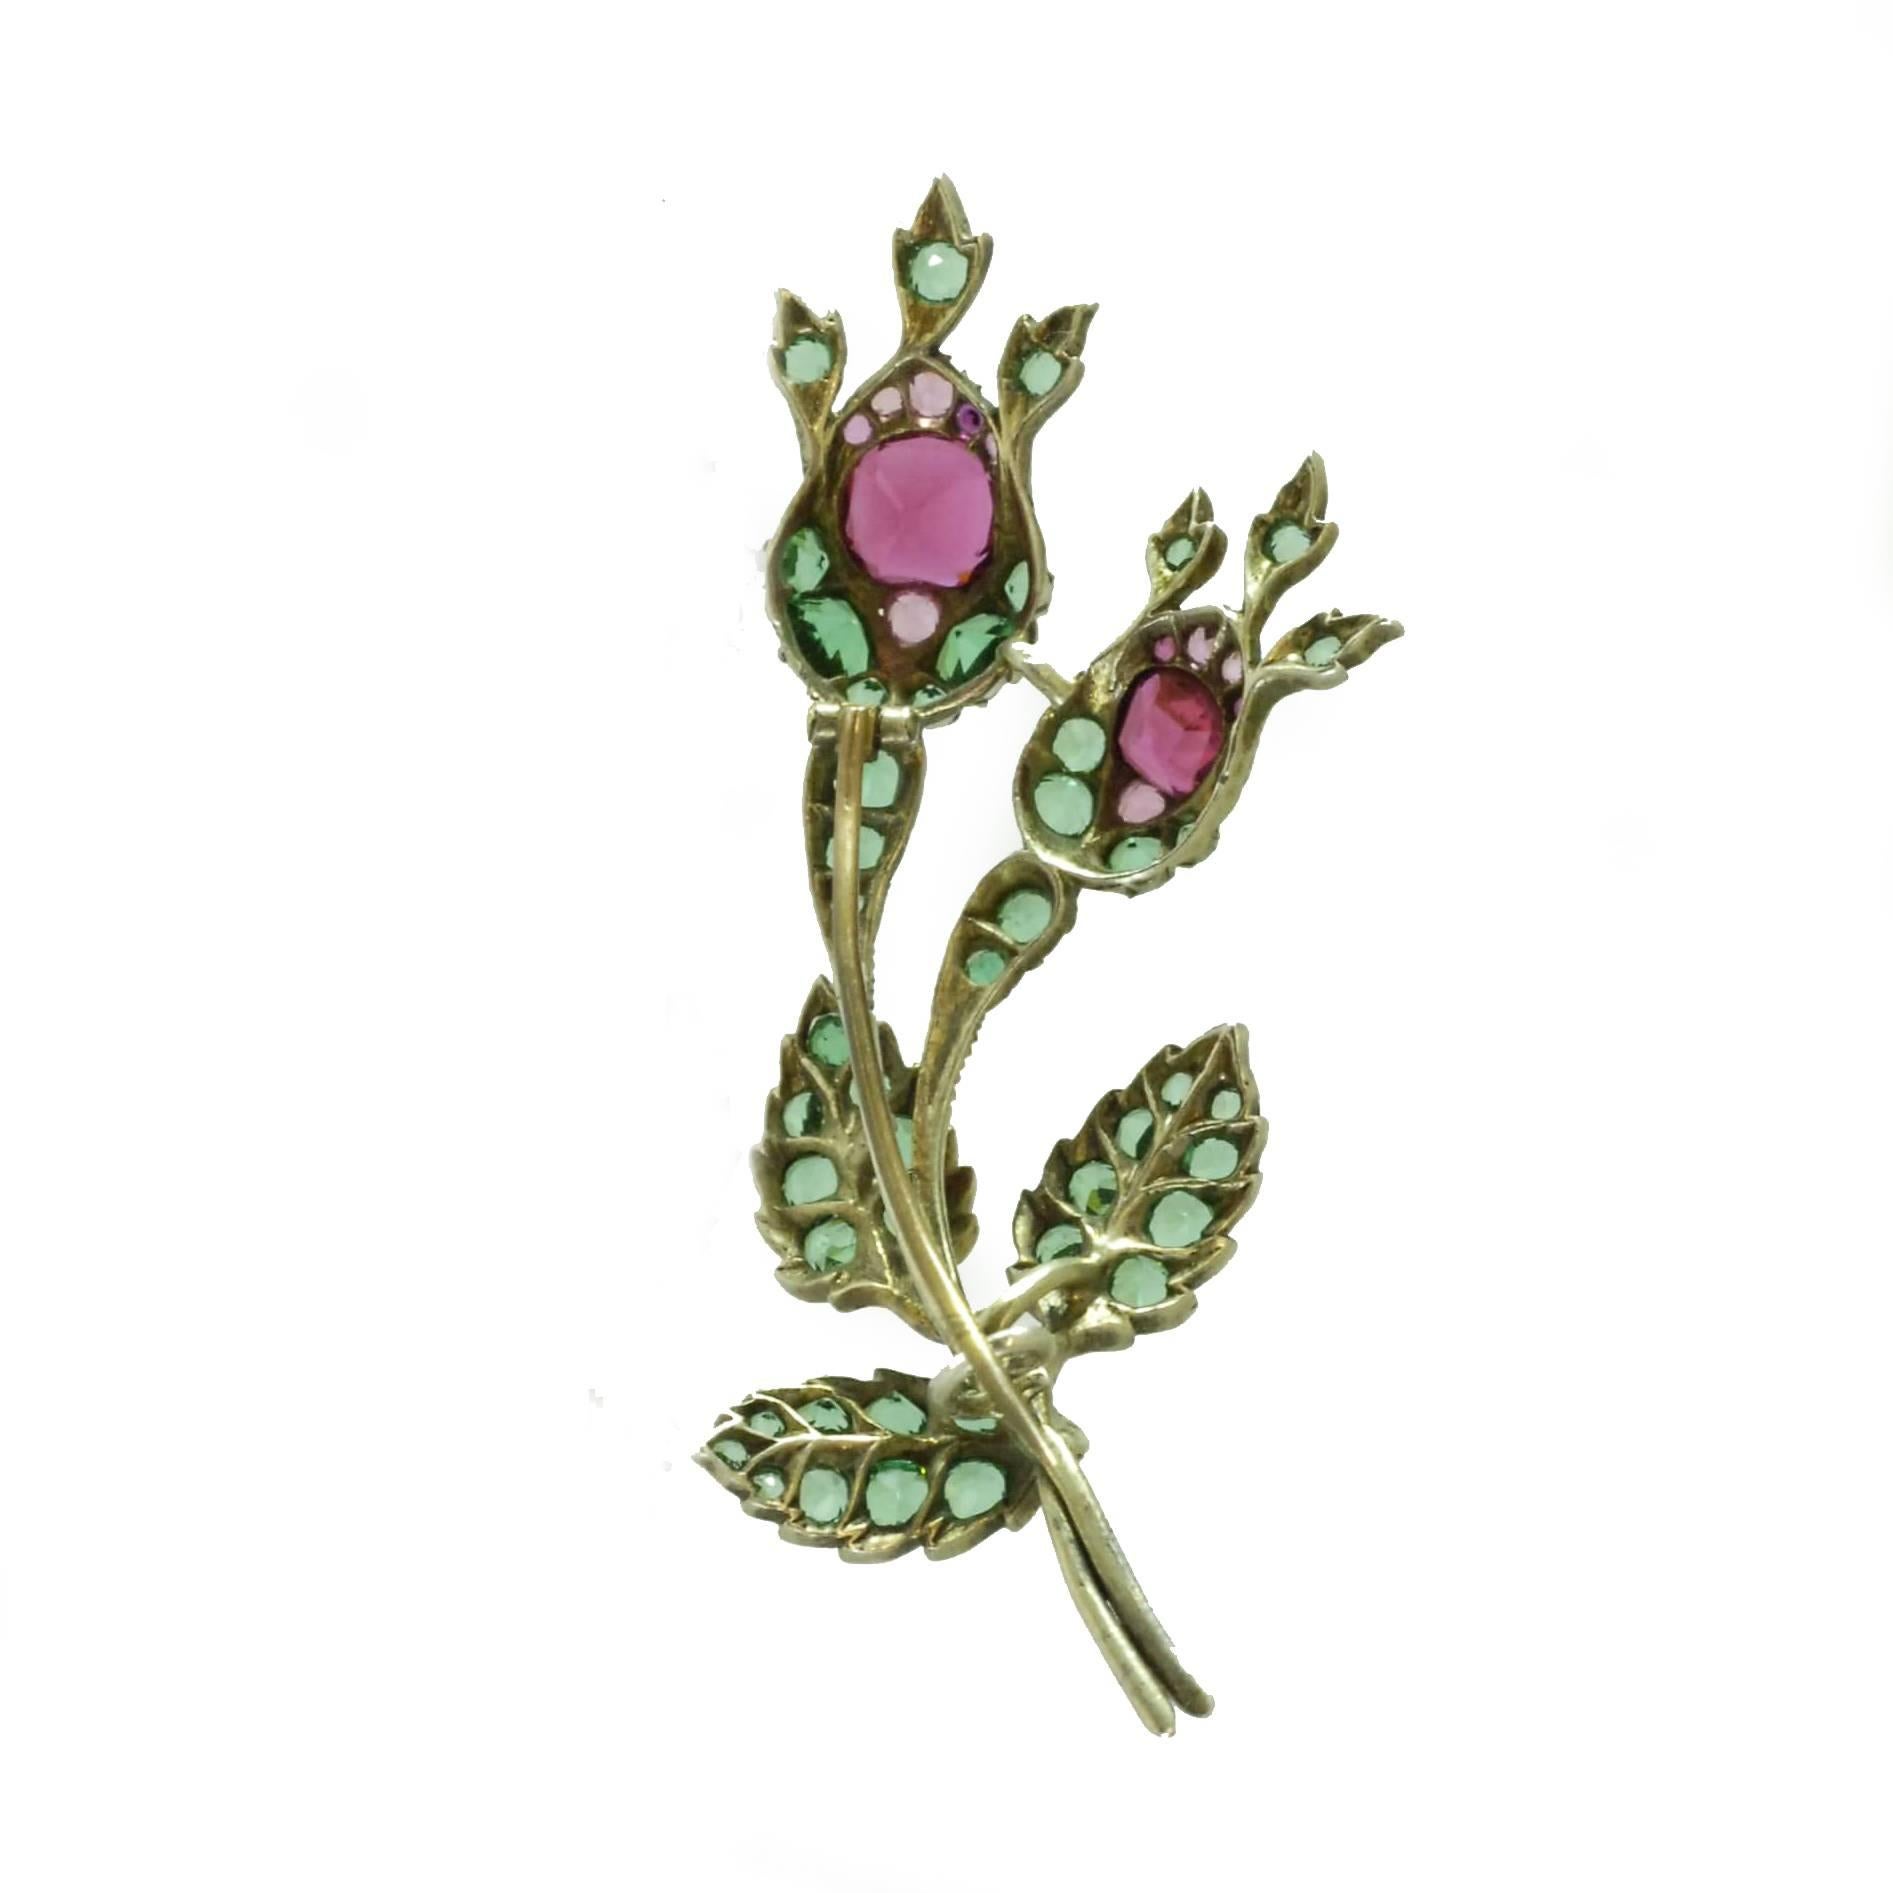 A brooch in the form of a rose bud sprig set with green and red paste. Mounted in silver and gilt metal. English, circa 1850.